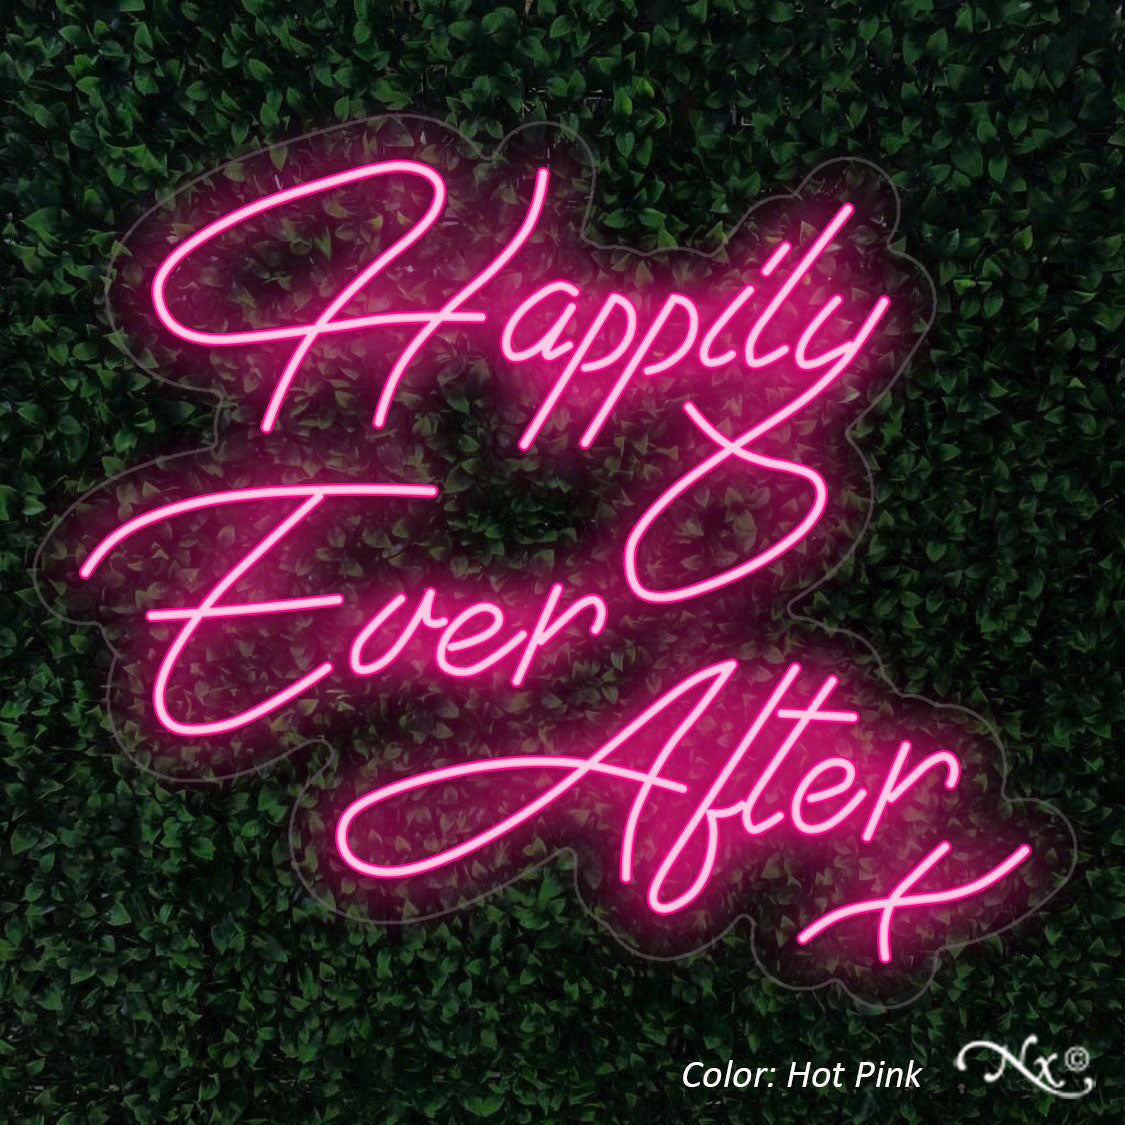 Happily Ever After Neon Sign color hot pink